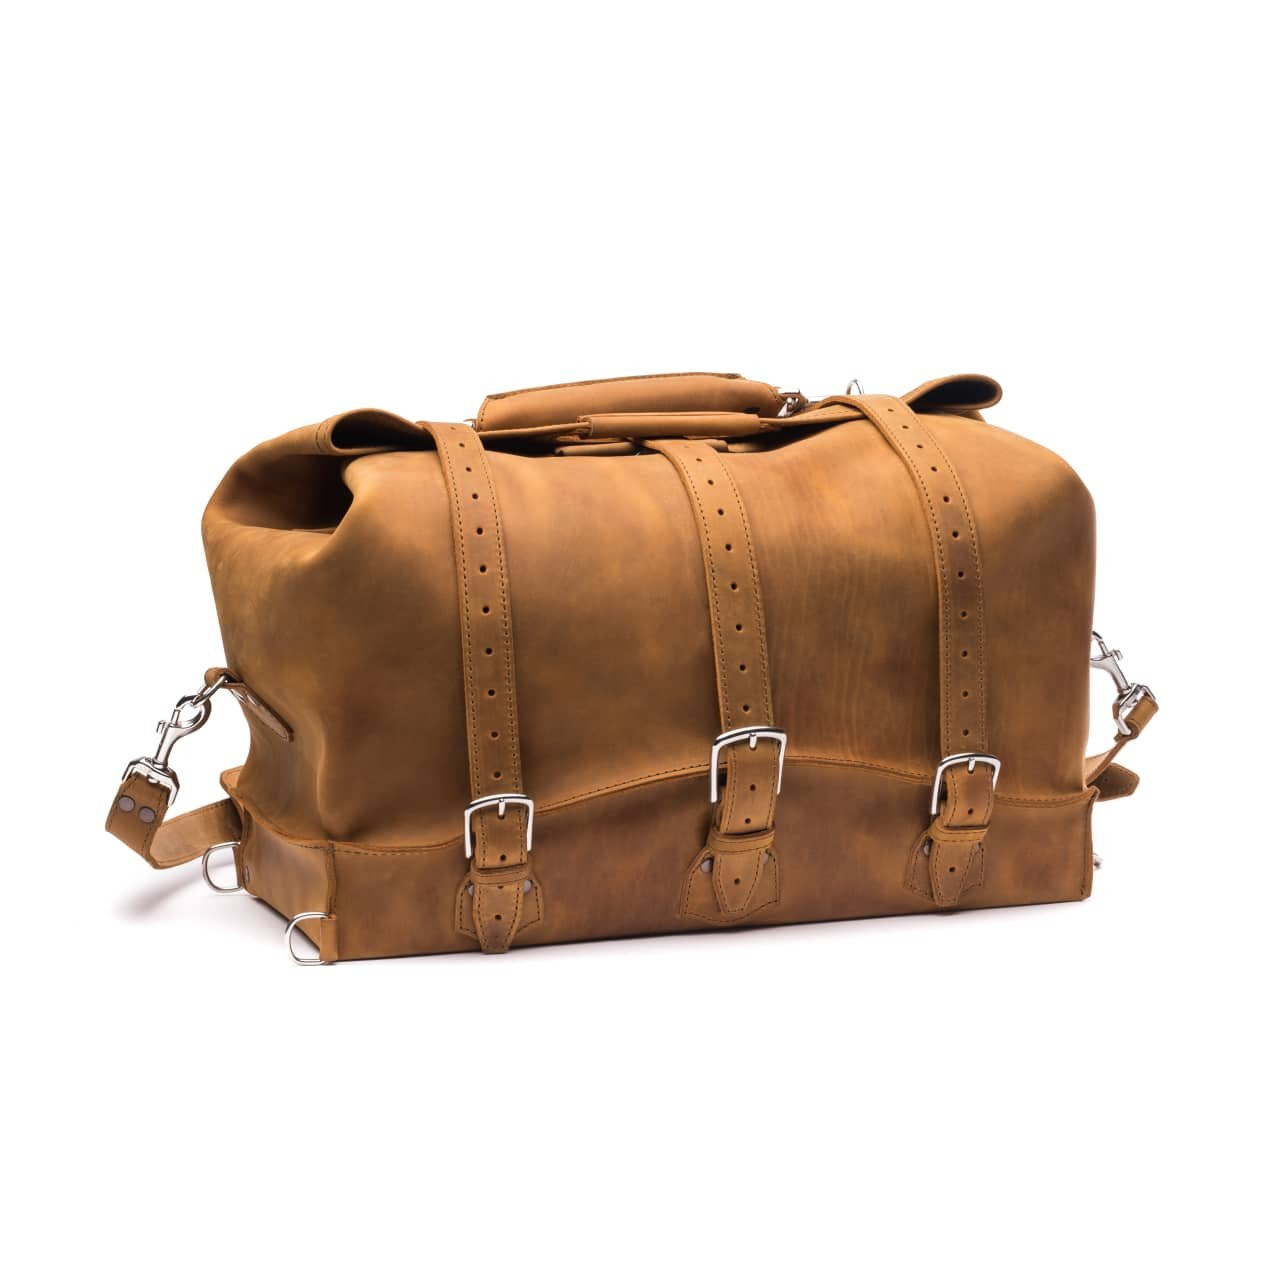 CAMINO | Small Weekender Leather Duffle Bag (SLC-203) - Sarge Leather Co.